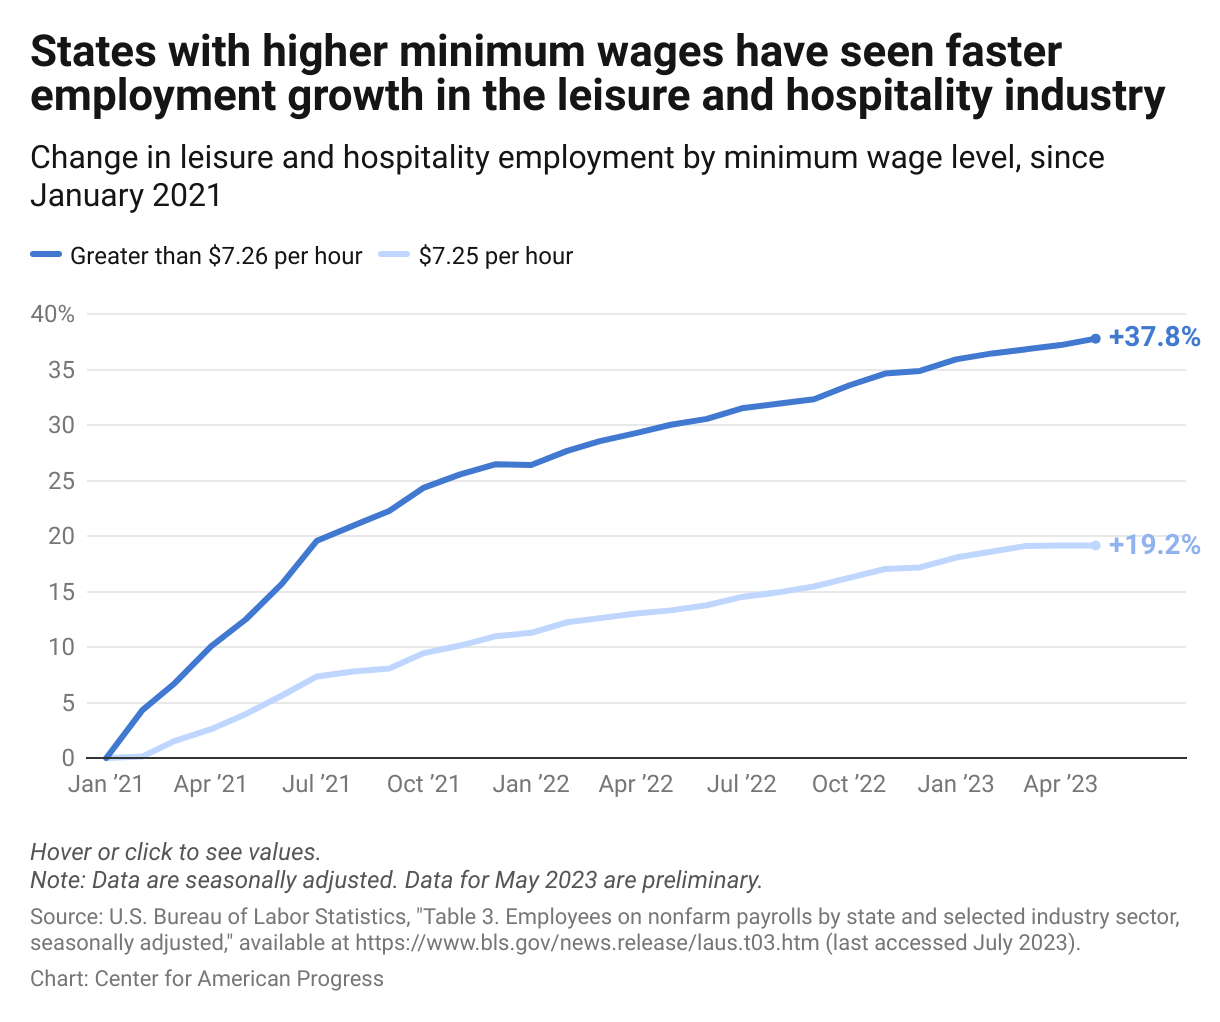 A line graph showing the recovery of the leisure and hospitality industry from January 2021 to May 2023 in states with the federal minimum wage of $7.25 compared with states that have higher minimum wages.